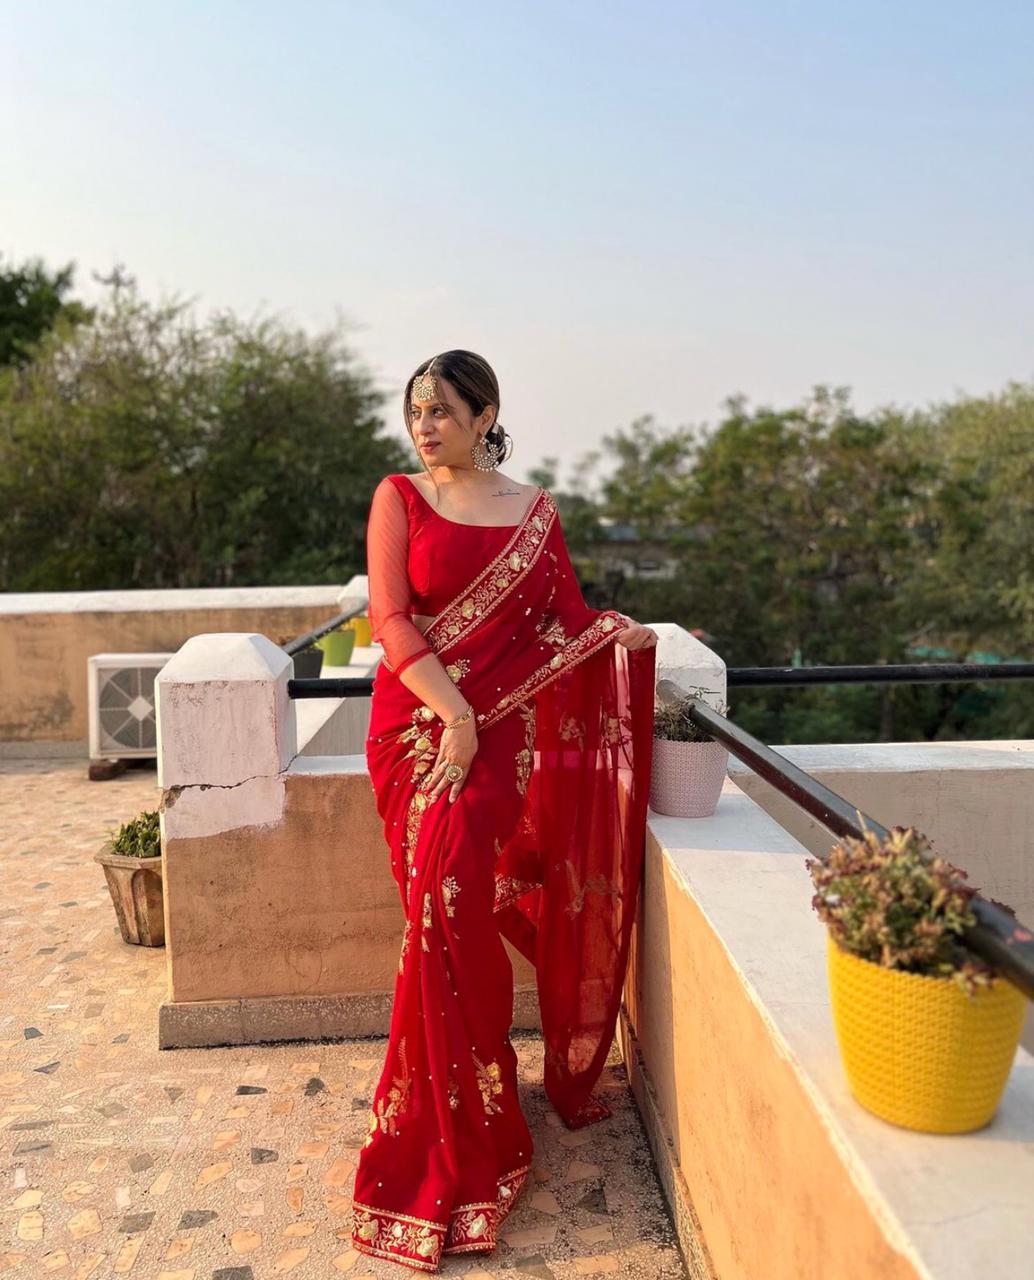 "Flowing Grace, Effortless Charm: Elevate Your Style with Georgette Sarees"